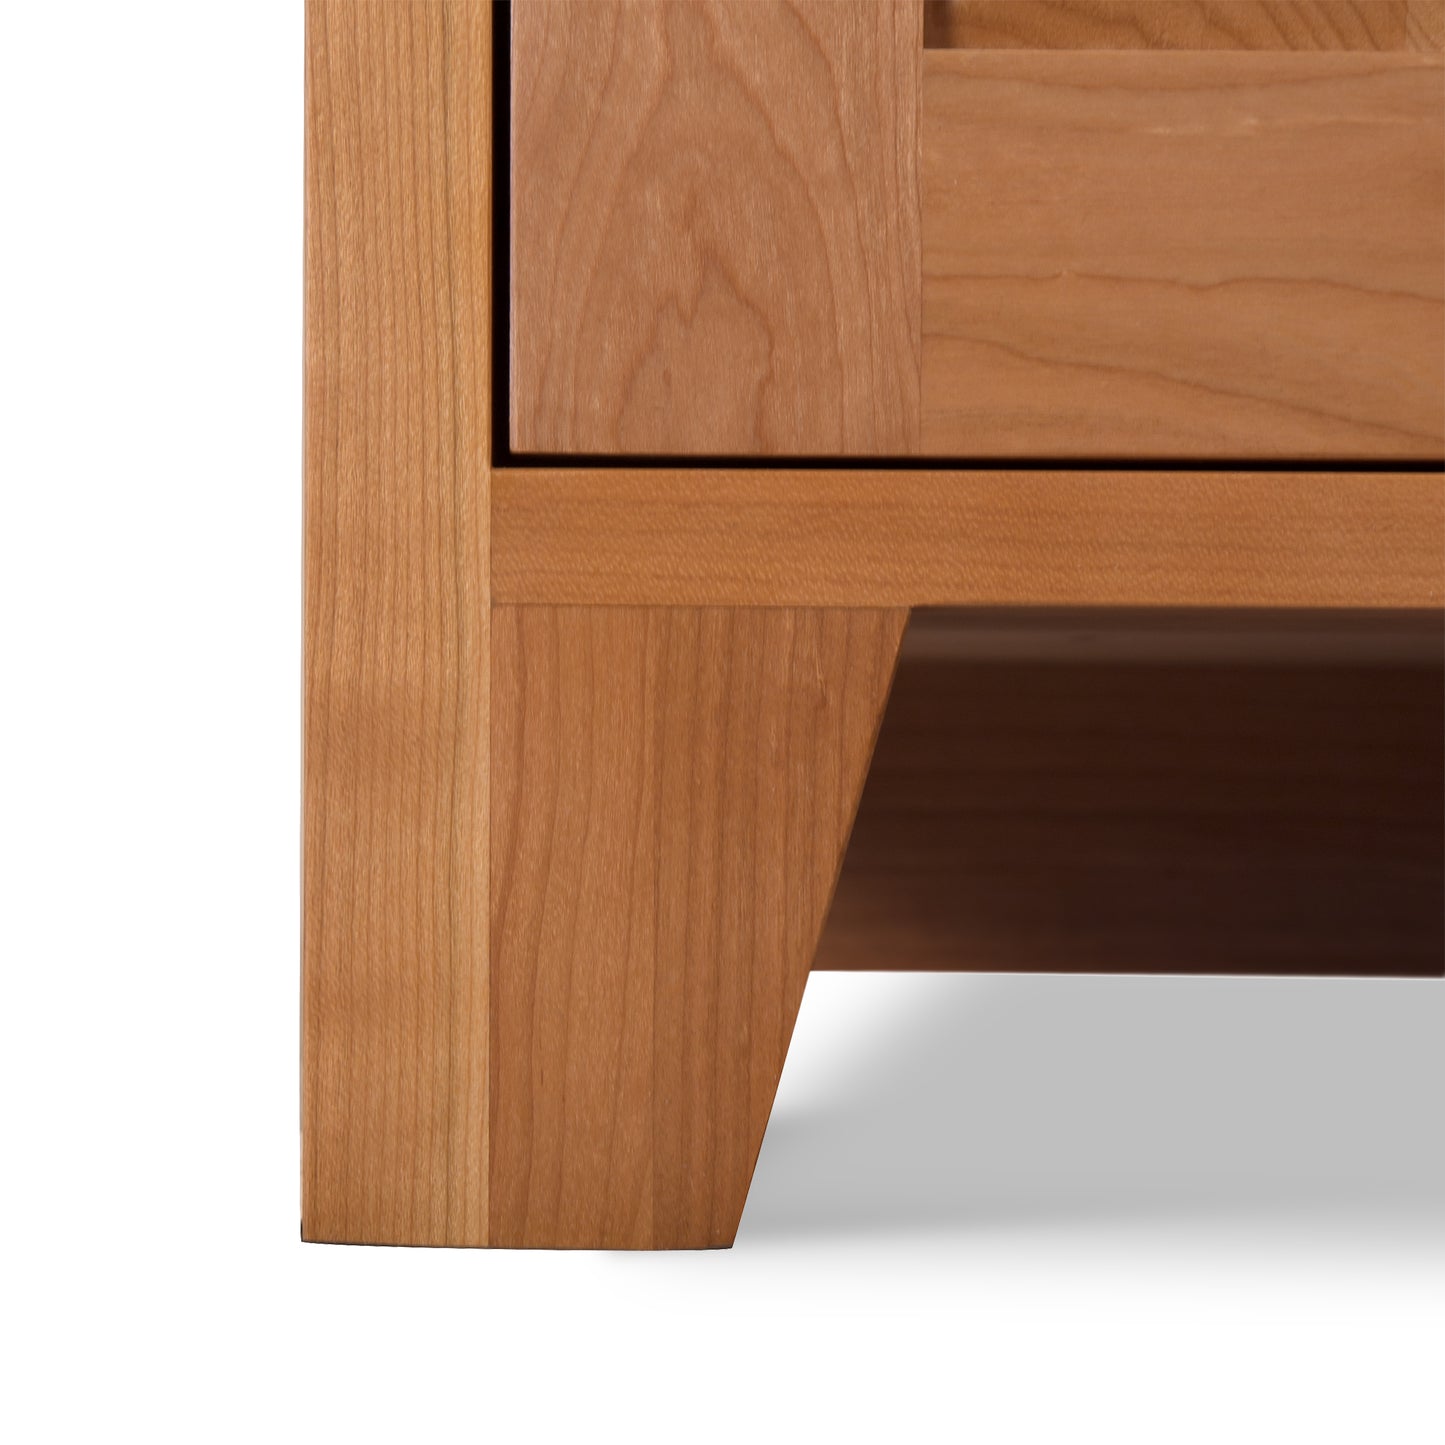 A close up view of a Lyndon Furniture Classic Country Buffet wooden nightstand.